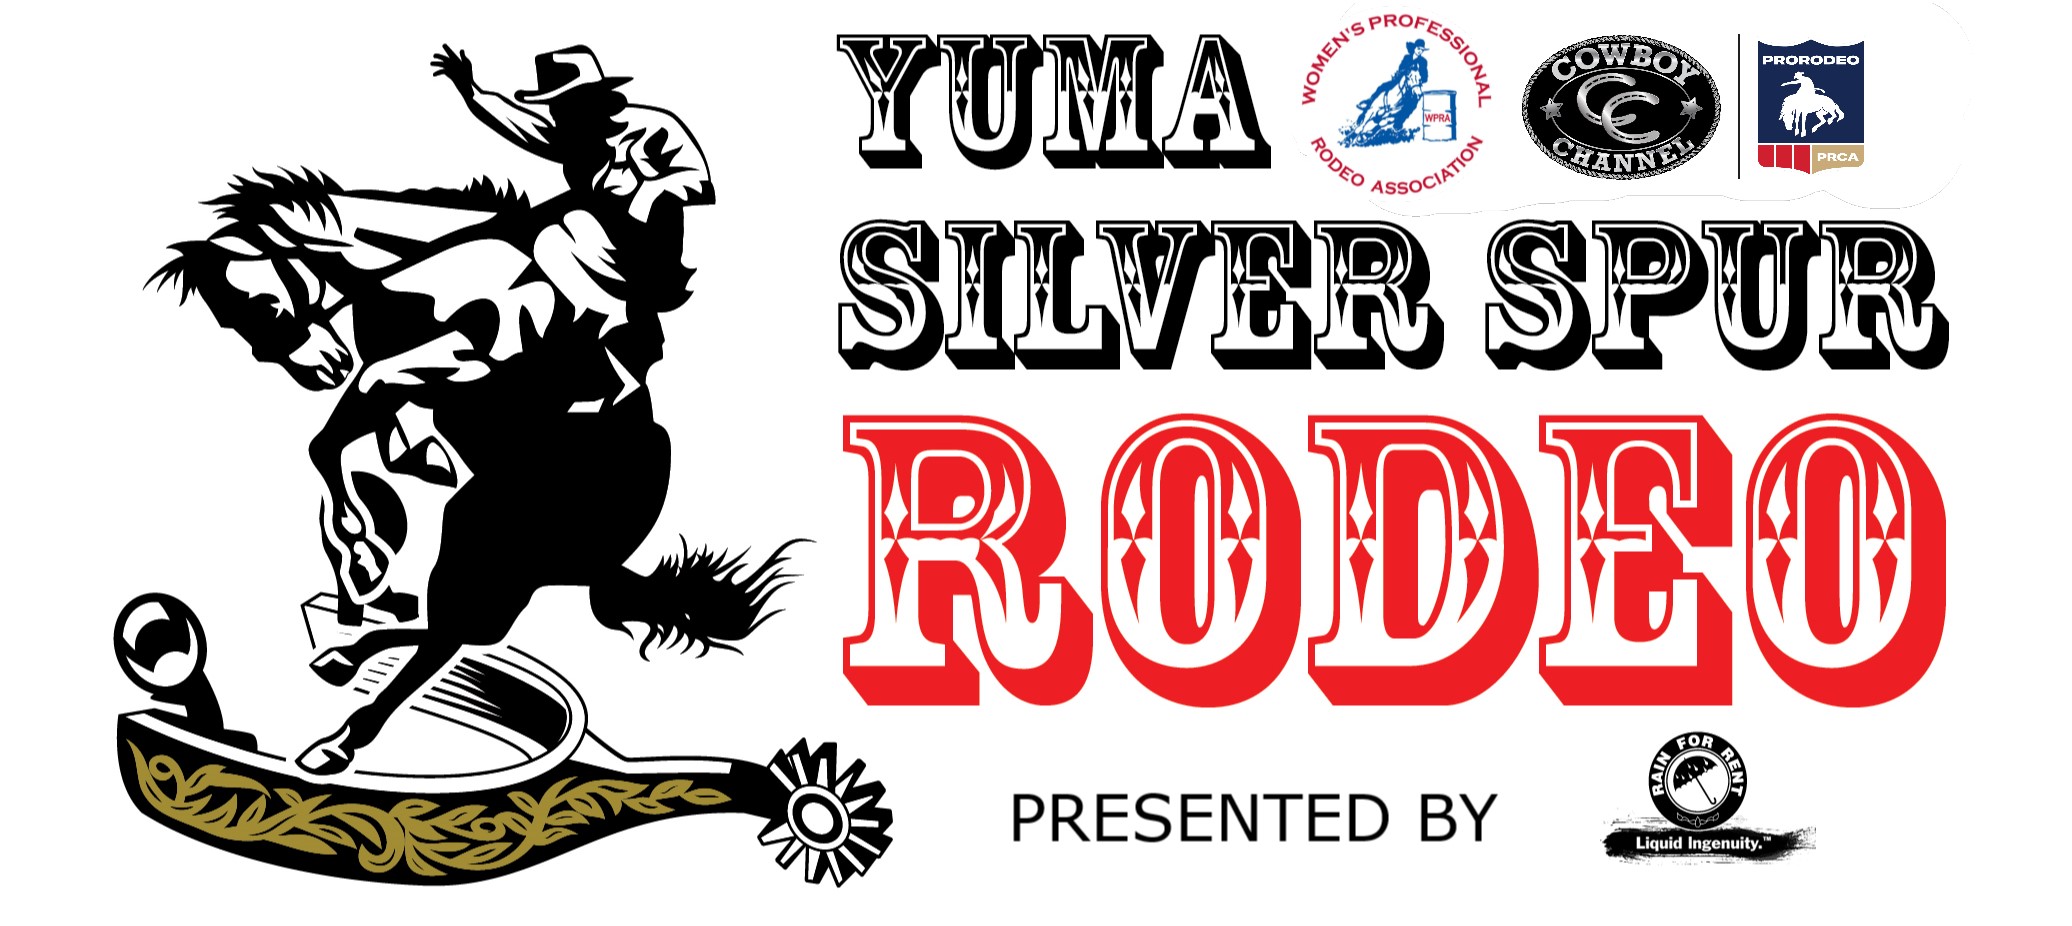 Yuma Silver Spur Rodeo | Yuma's Best Professional Sports Event!